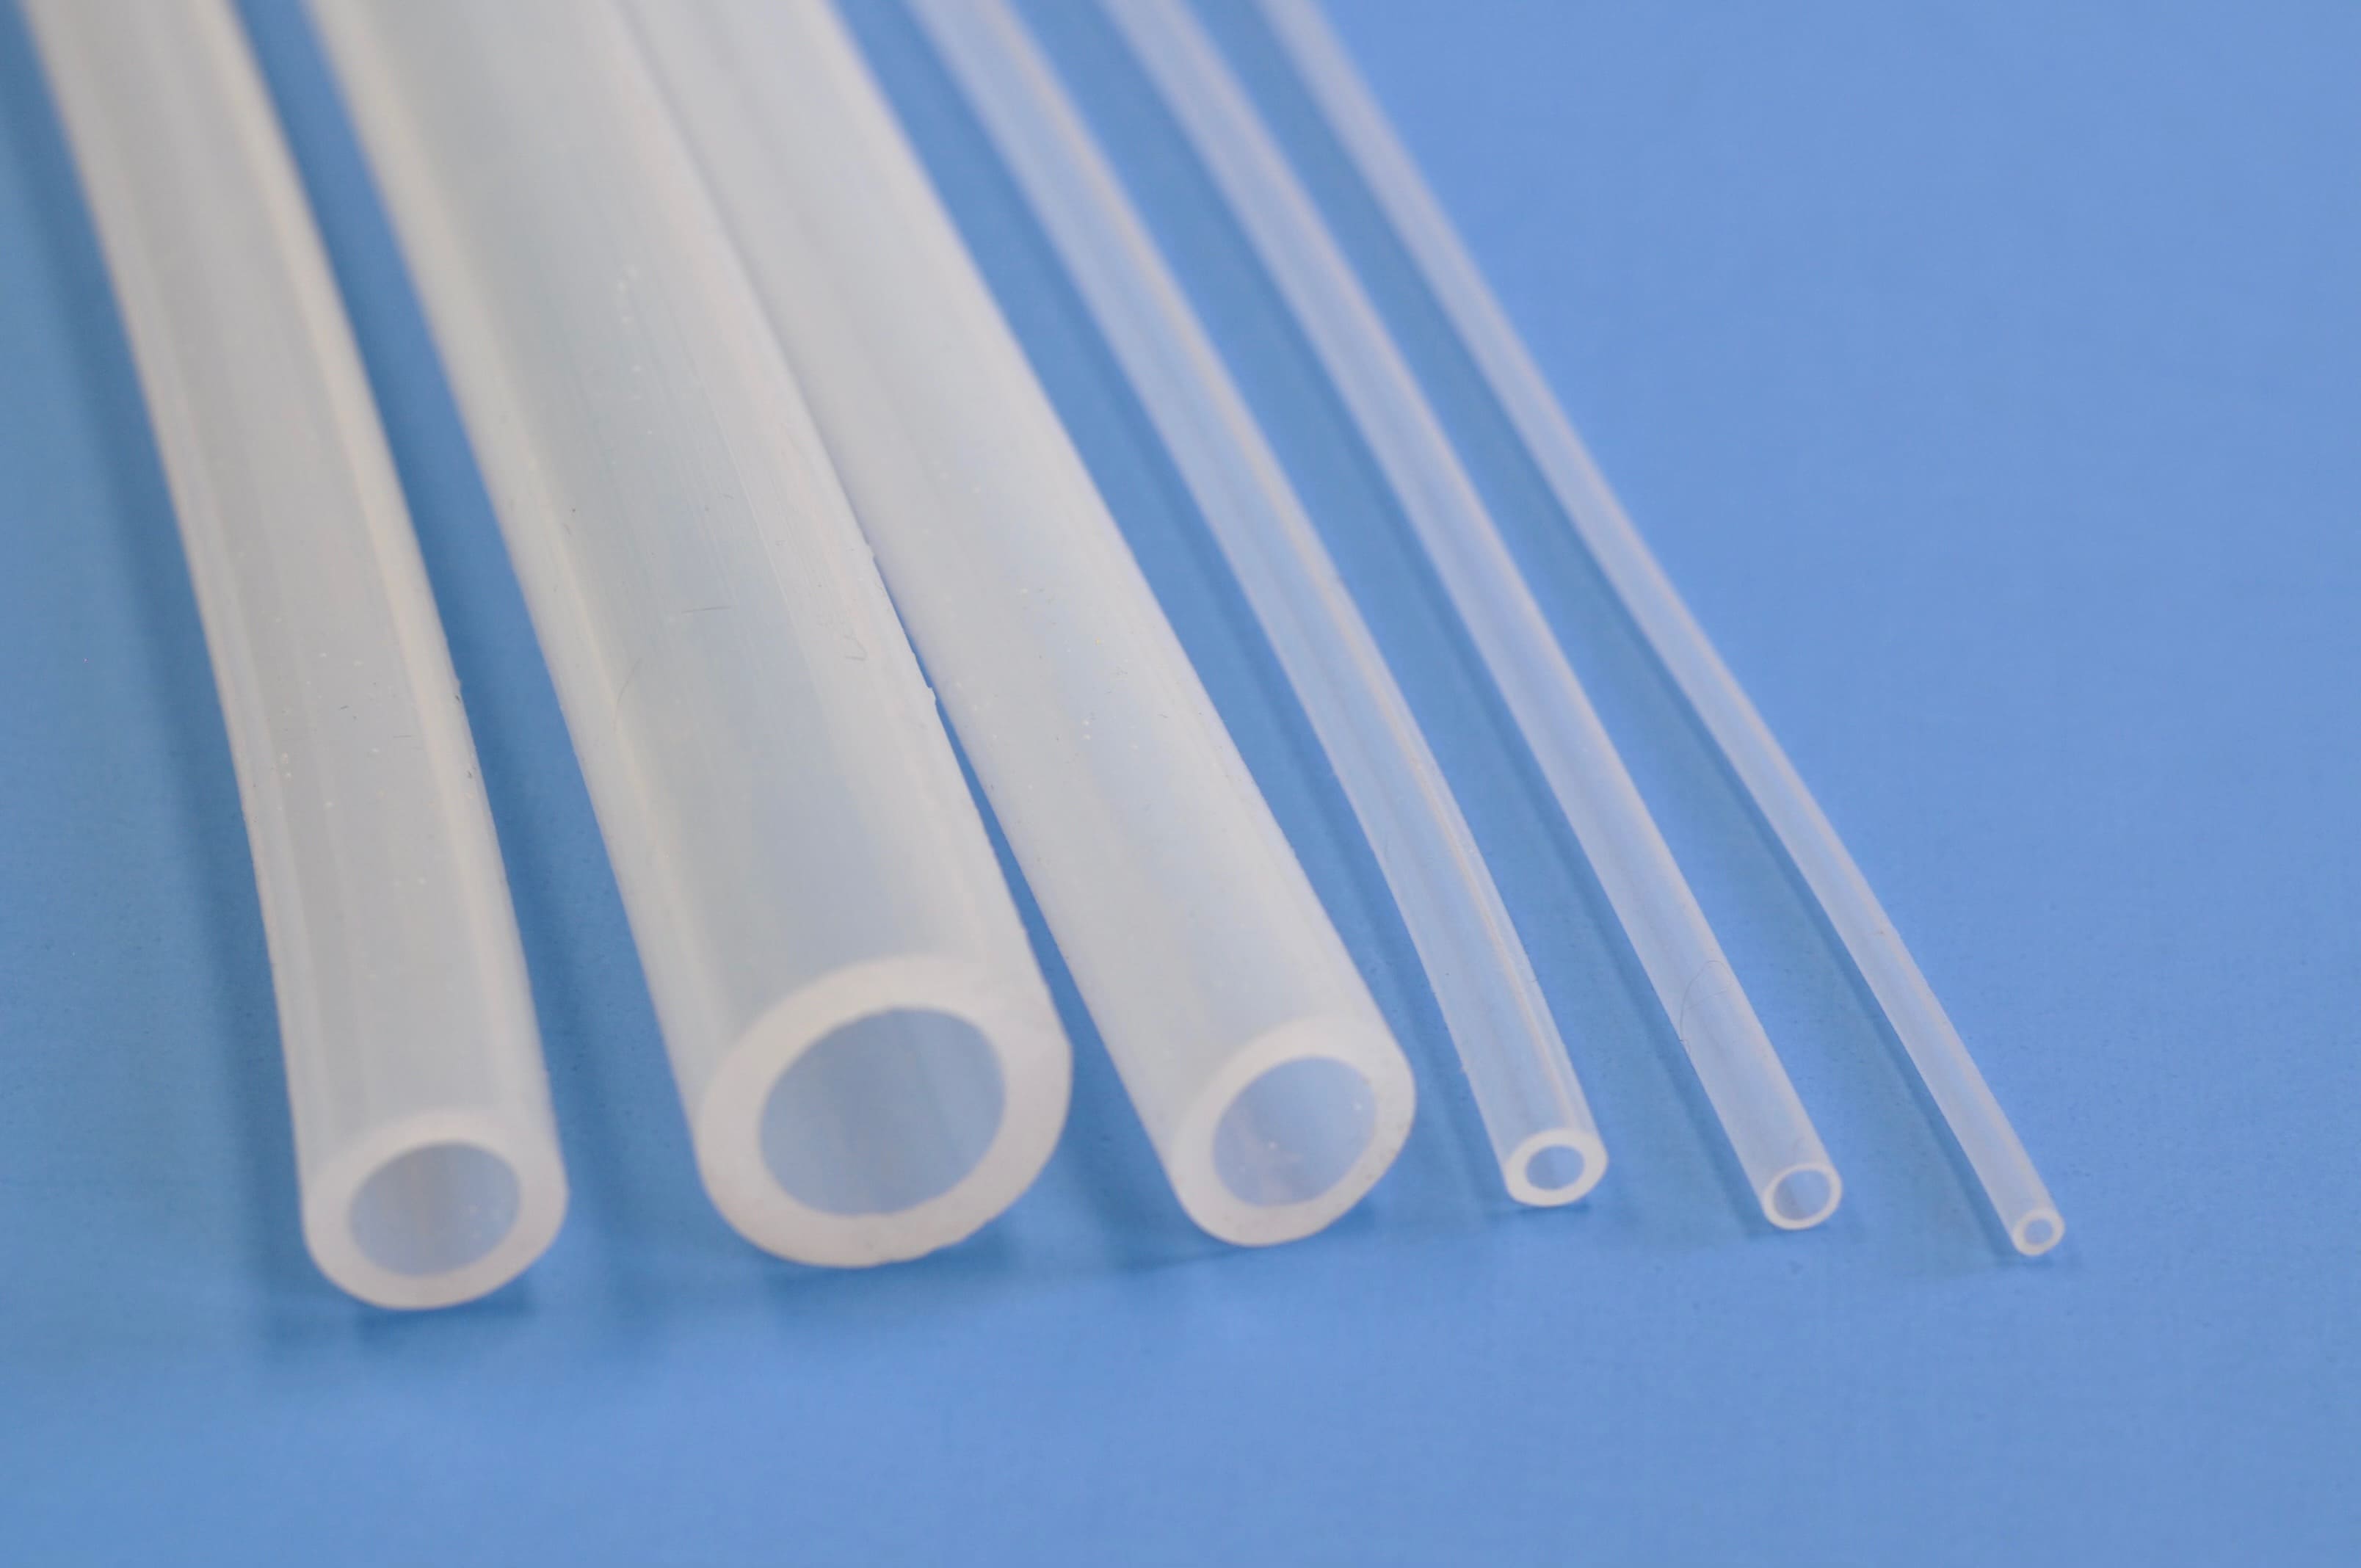 Six clear silicone tubes aligned side-by-side. Each tube is a different size.